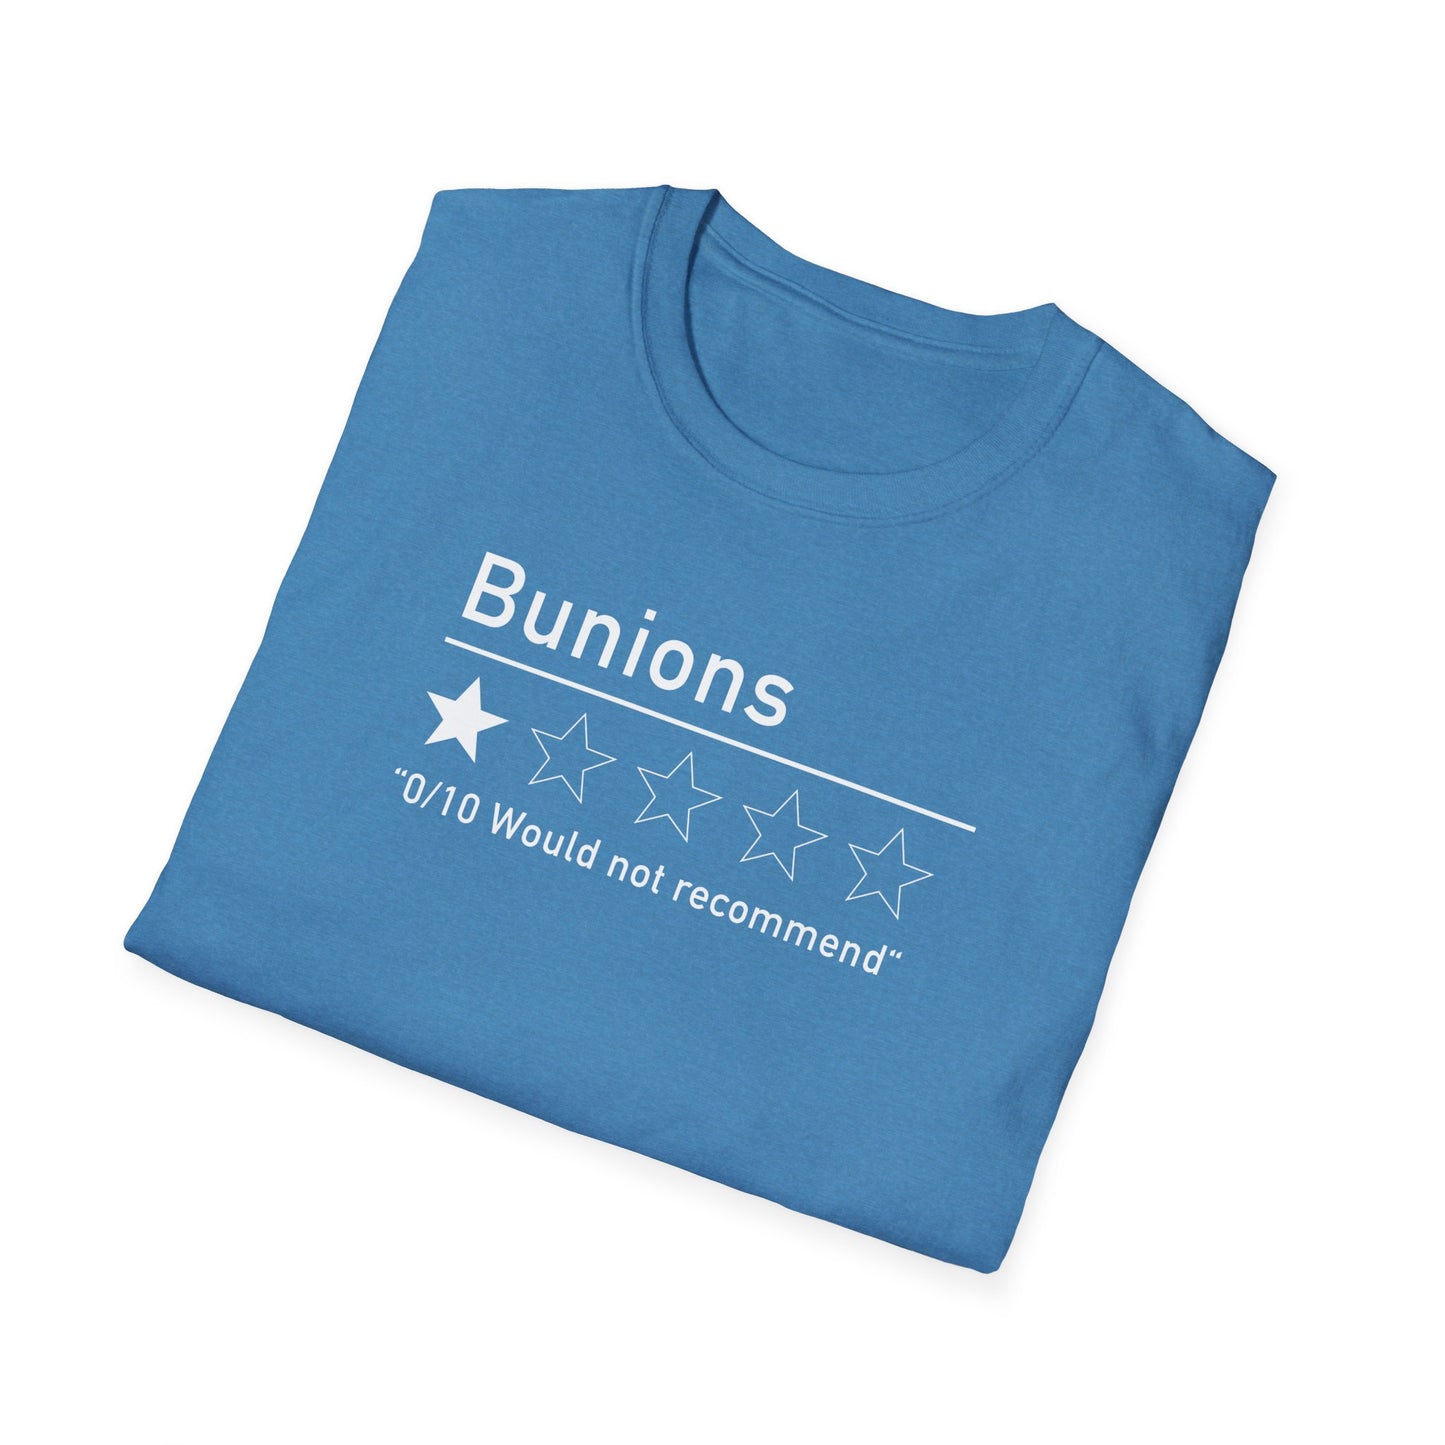 Bunions - "Would Not Recommend"